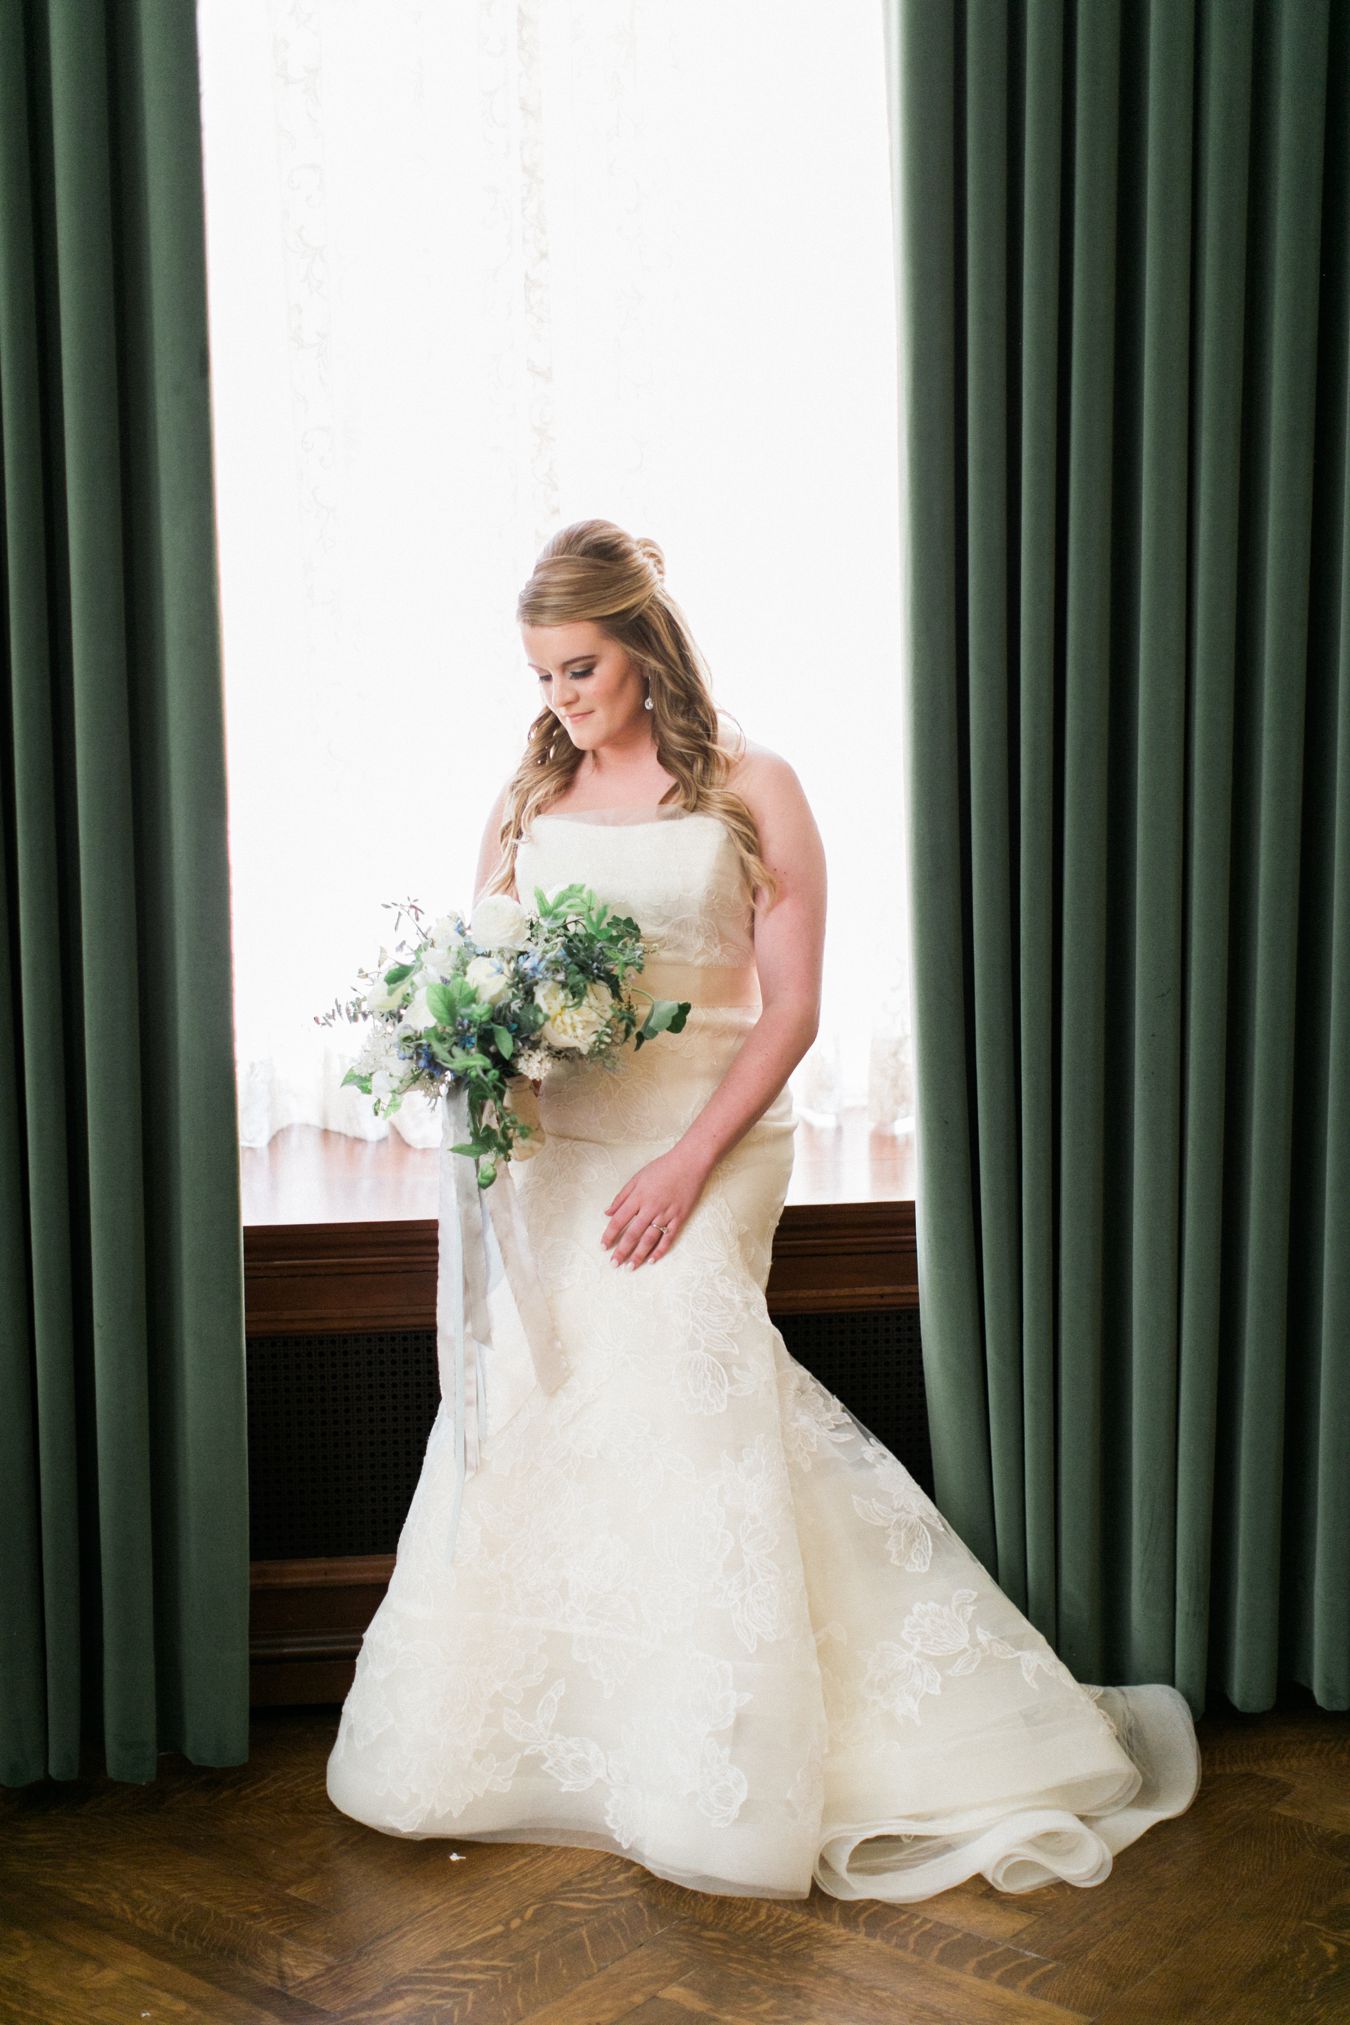 Vera Wang Bridal | Passionflower Events | Anchor Events | Detroit Athletic Club Wedding | Cory Weber Photography